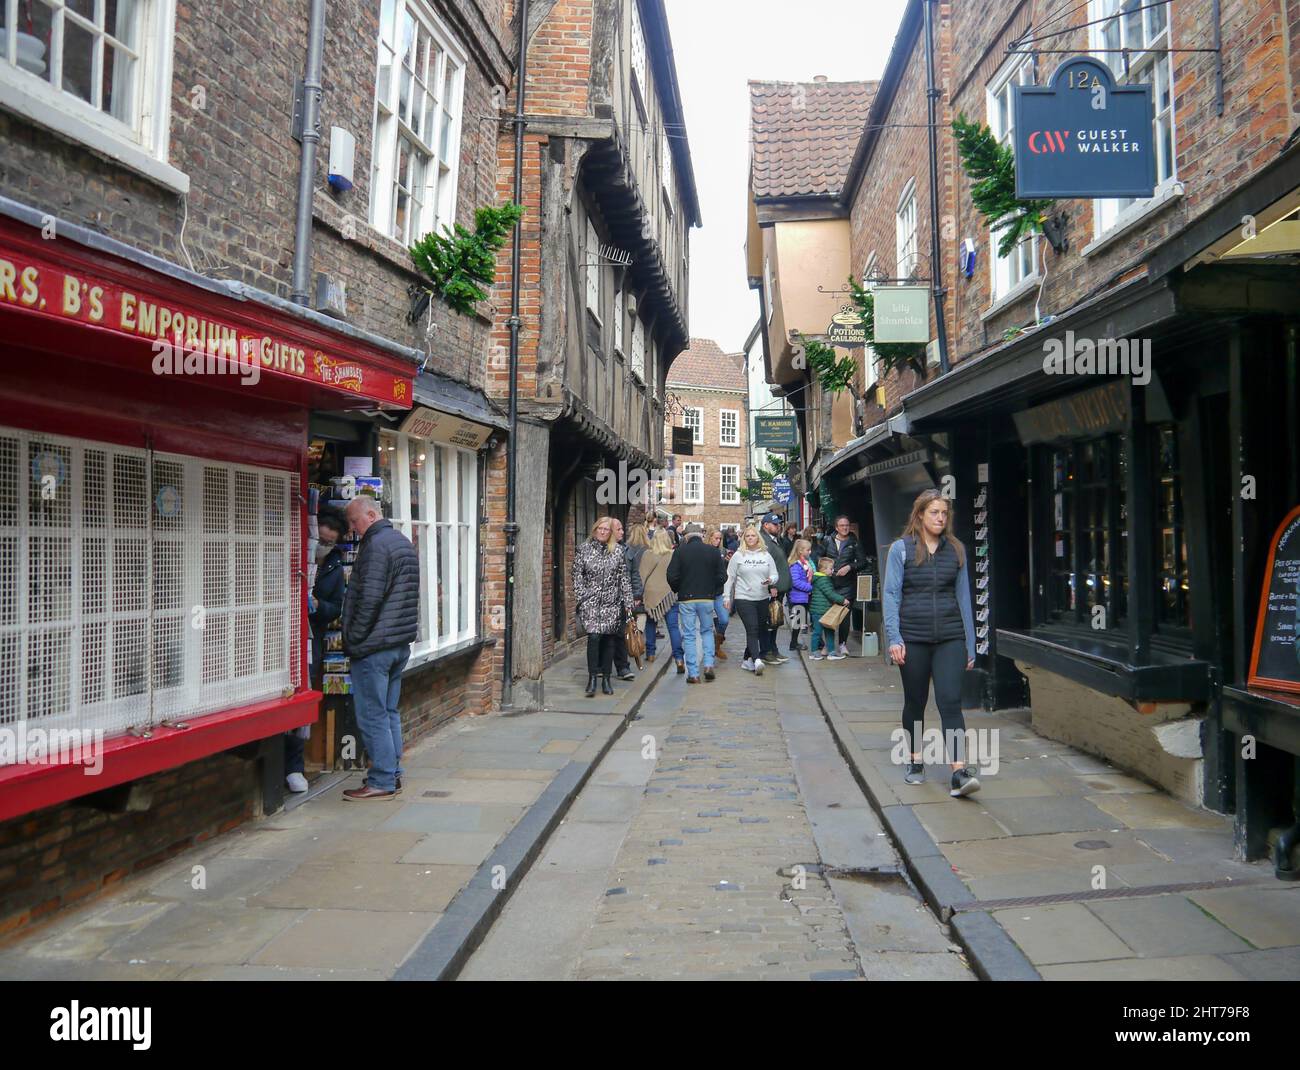 Medieval buildings  in the shambles, York, England Stock Photo